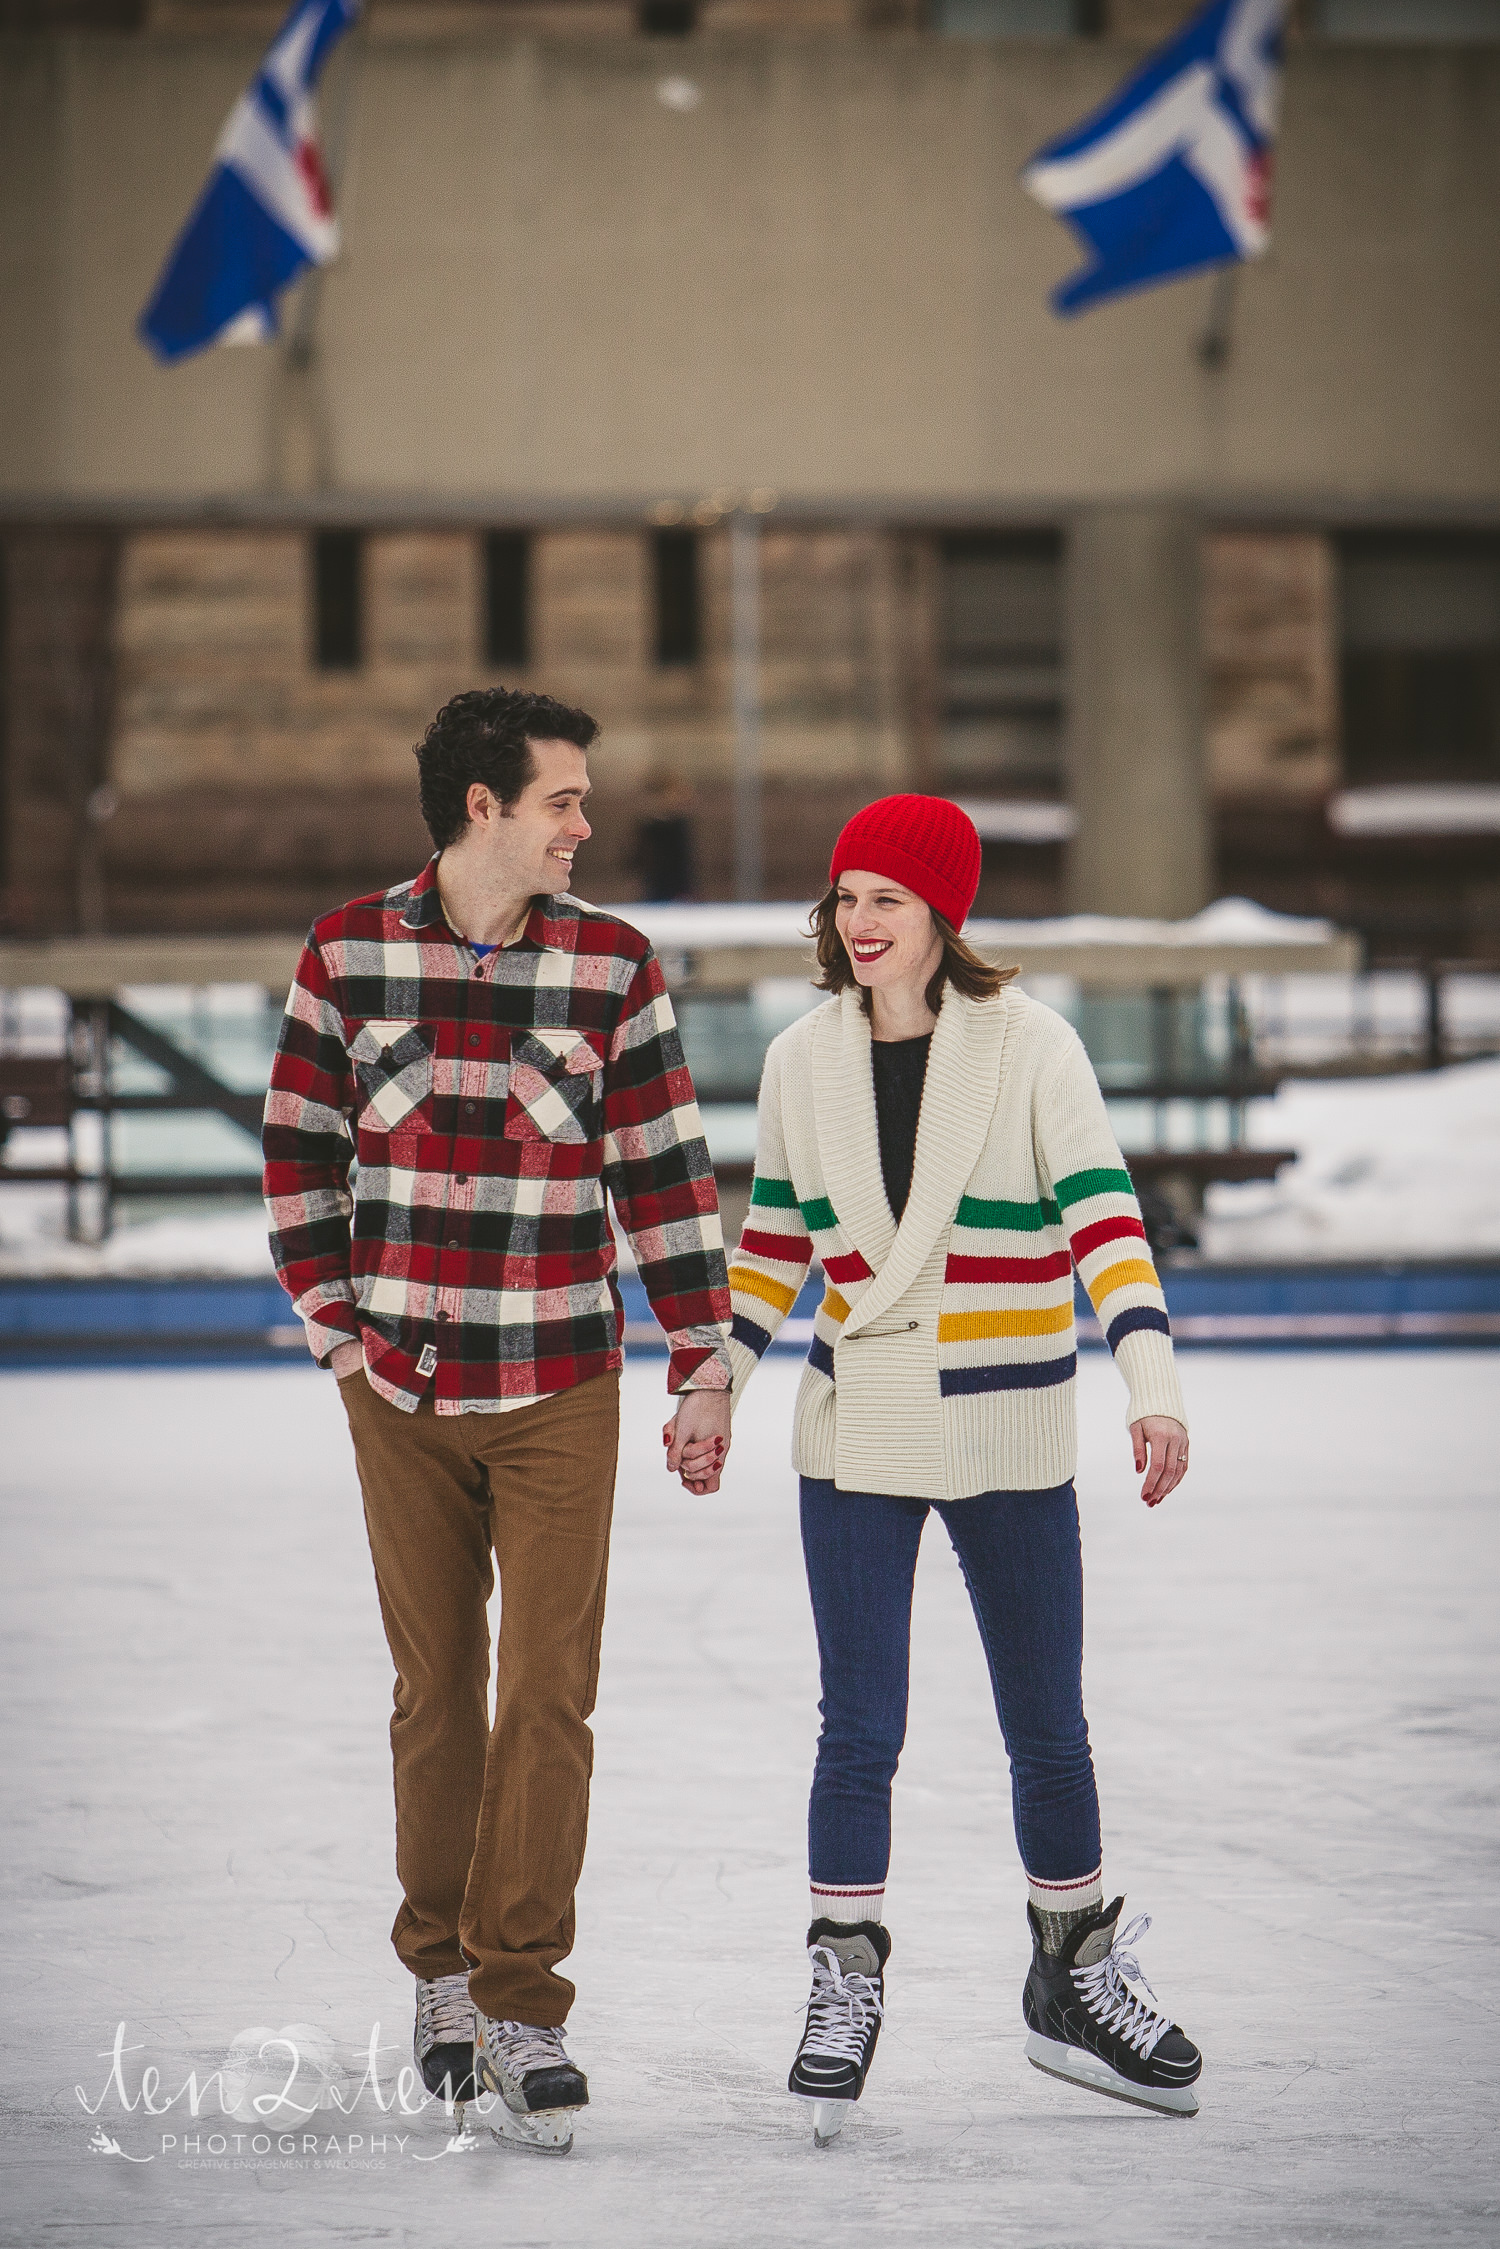 nathan phillips square engagement photos, downtown toronto engagement photos, ice skating engagement photos, skating rink engagement photos, downtown toronto engagement photos